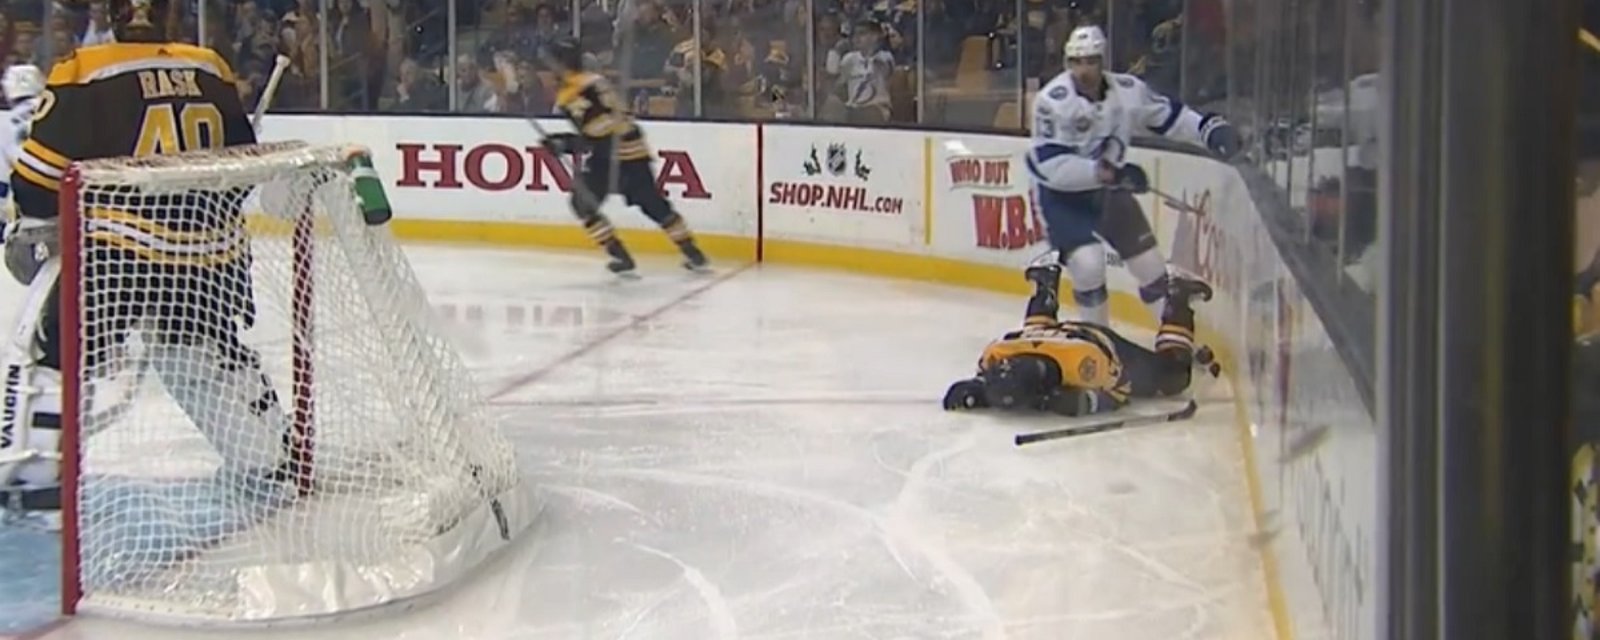 Torey Krug gets drilled from behind, goes head first into the boards.